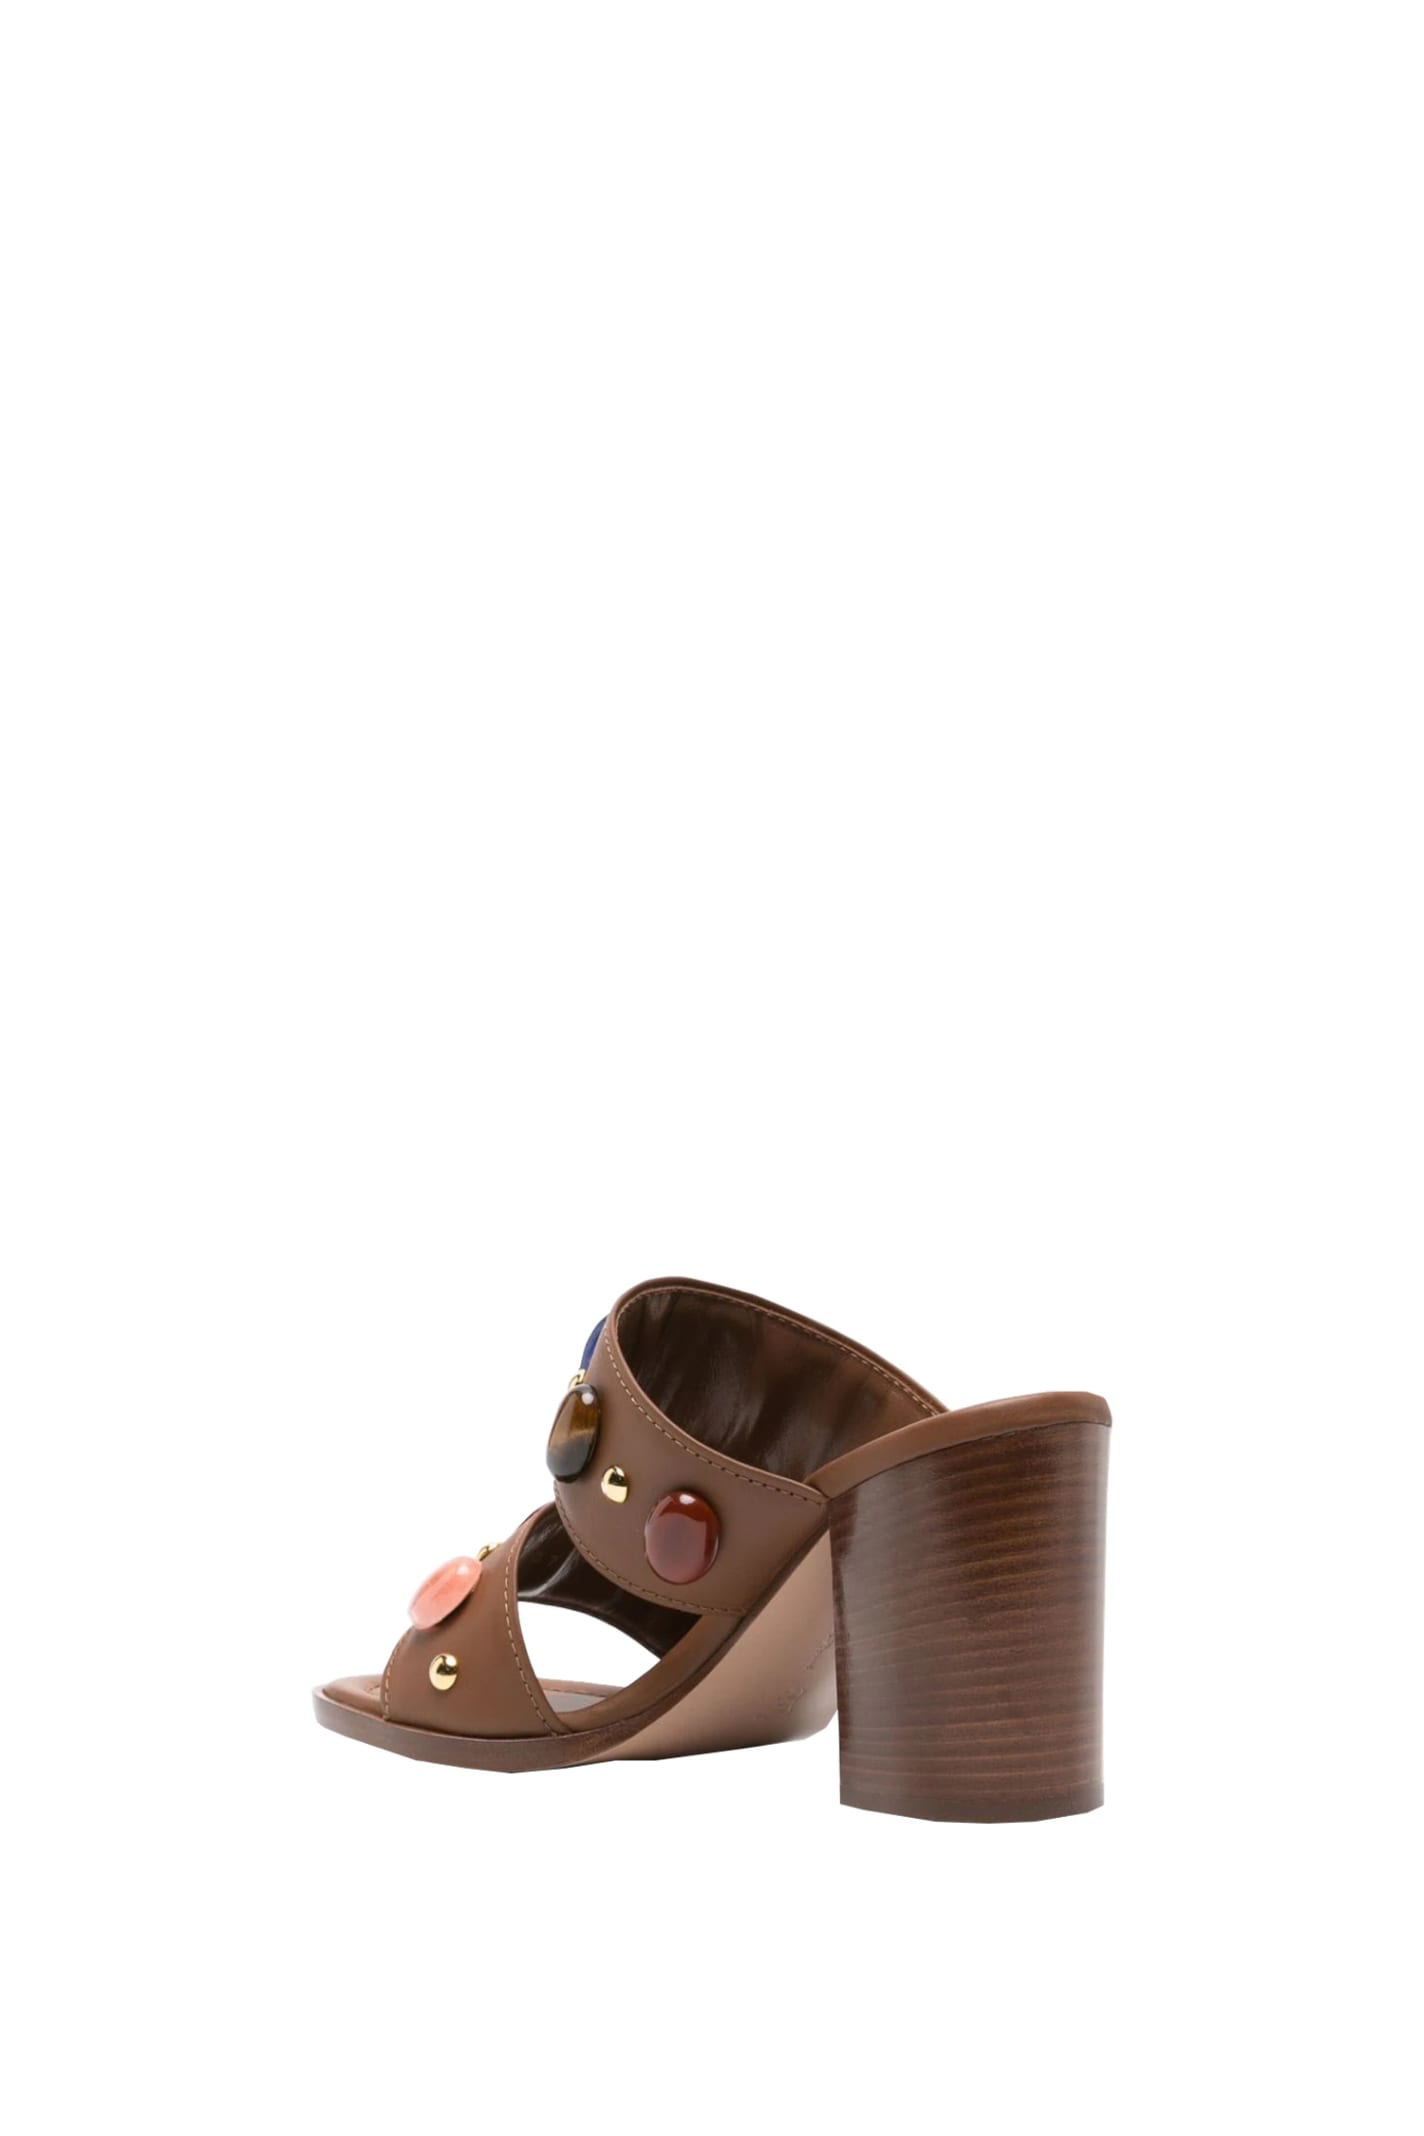 Shop Gianvito Rossi Shoes With Heel In Brown